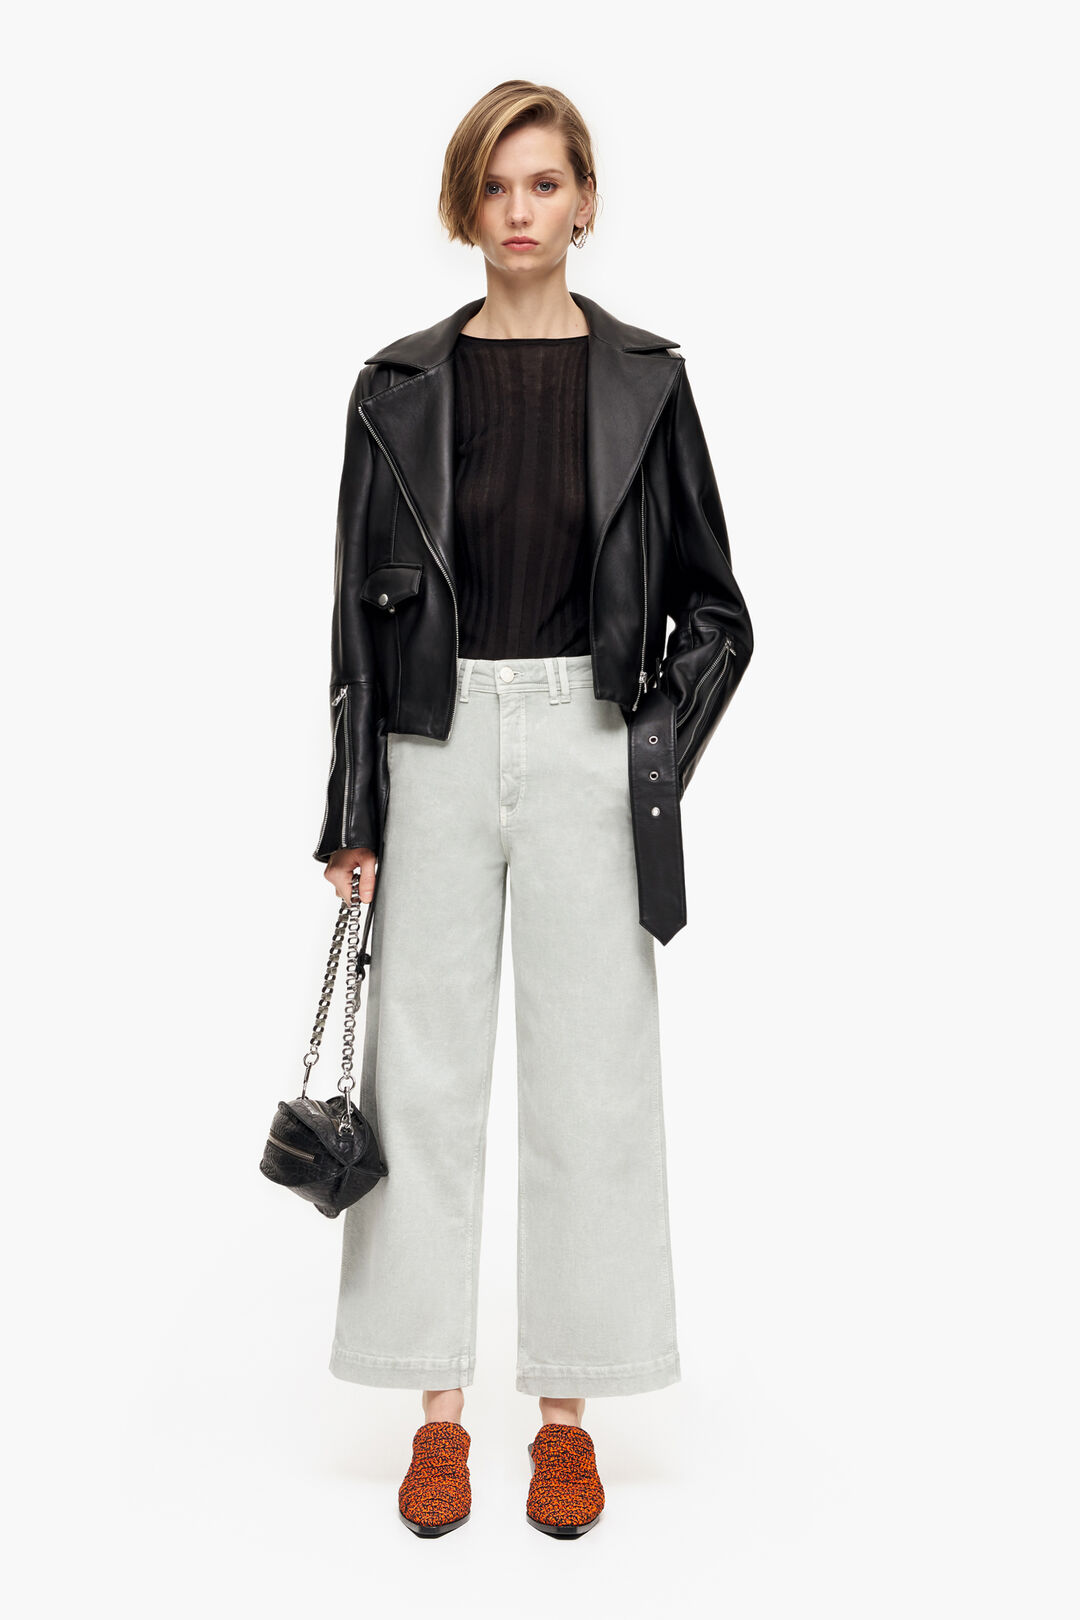 Topshop Faux Leather Culotte Overalls, $105, Nordstrom